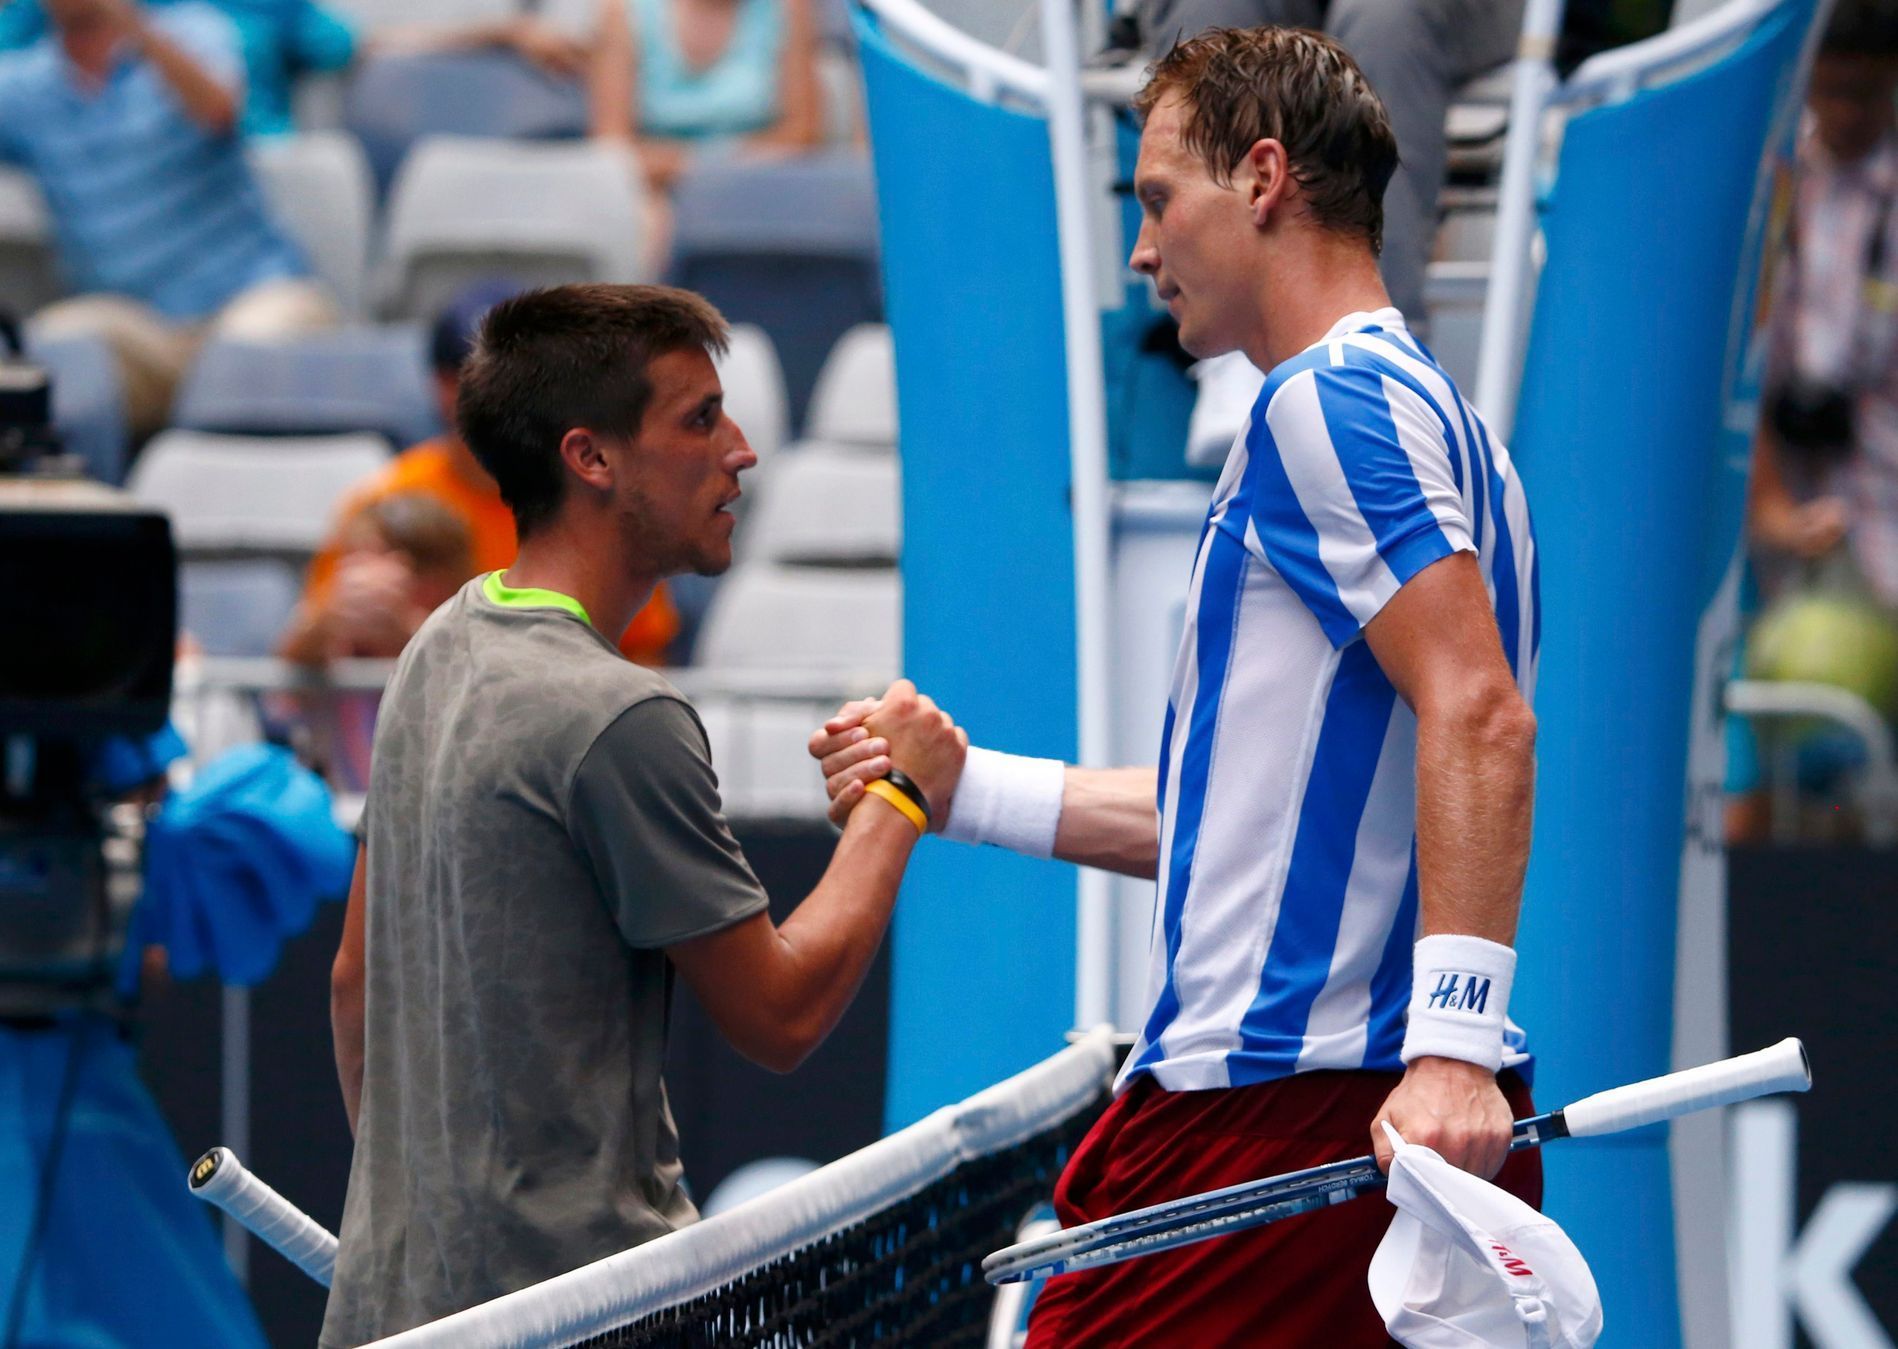 Tomas Berdych of Czech Republic shakes hands with Damir Dzumhur of Bosnia and Herzegovina after their men's singles match at the Australian Open 2014 tennis tournament in Melbourne